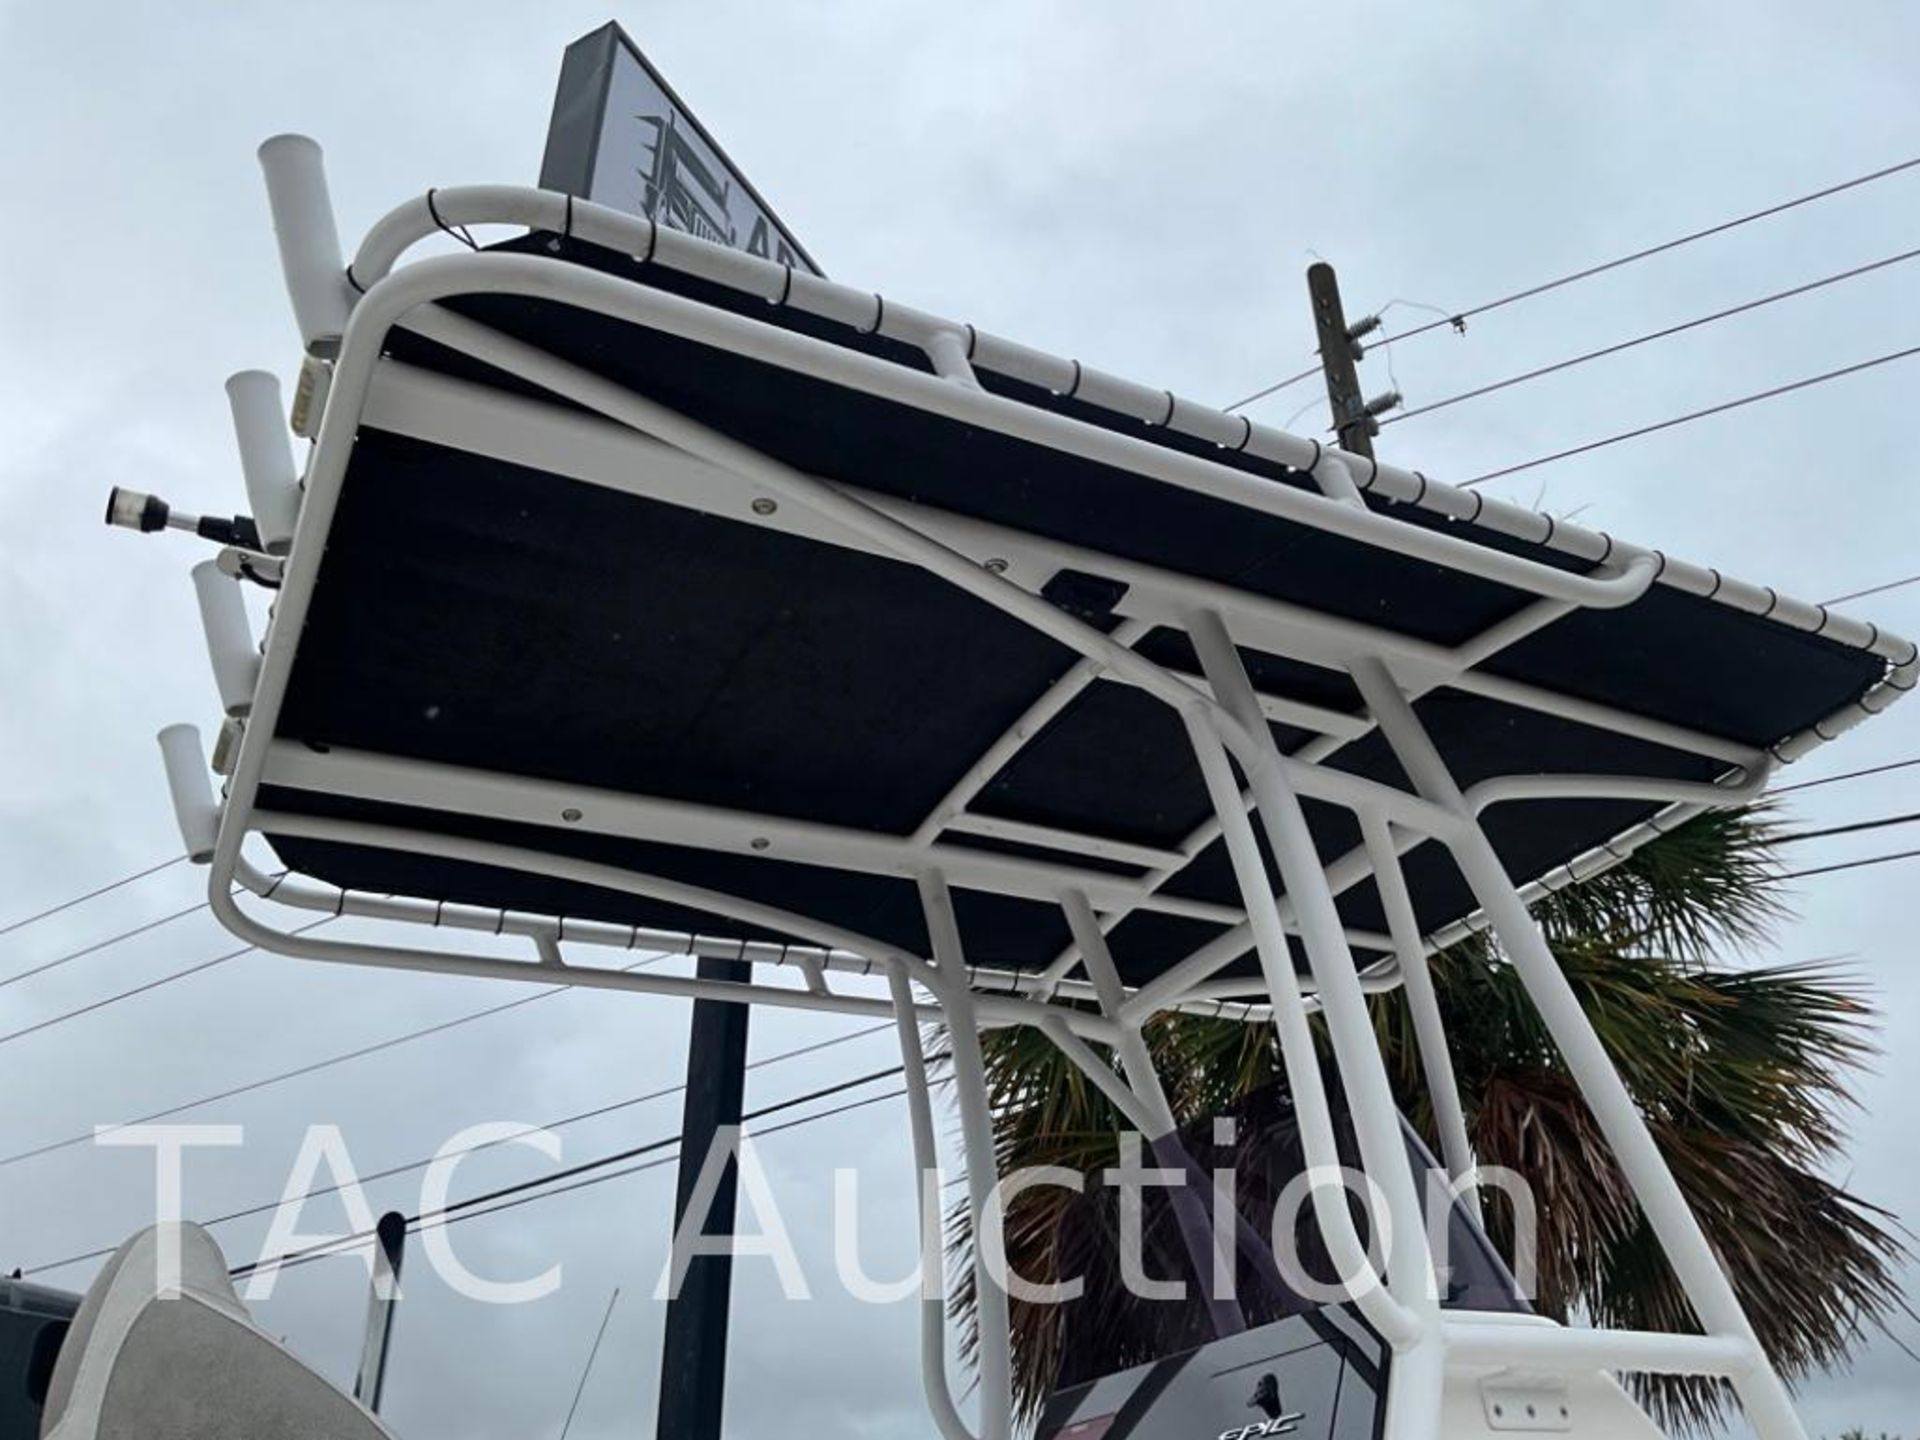 2019 Epic 24ft Bay Center Console - Image 9 of 48